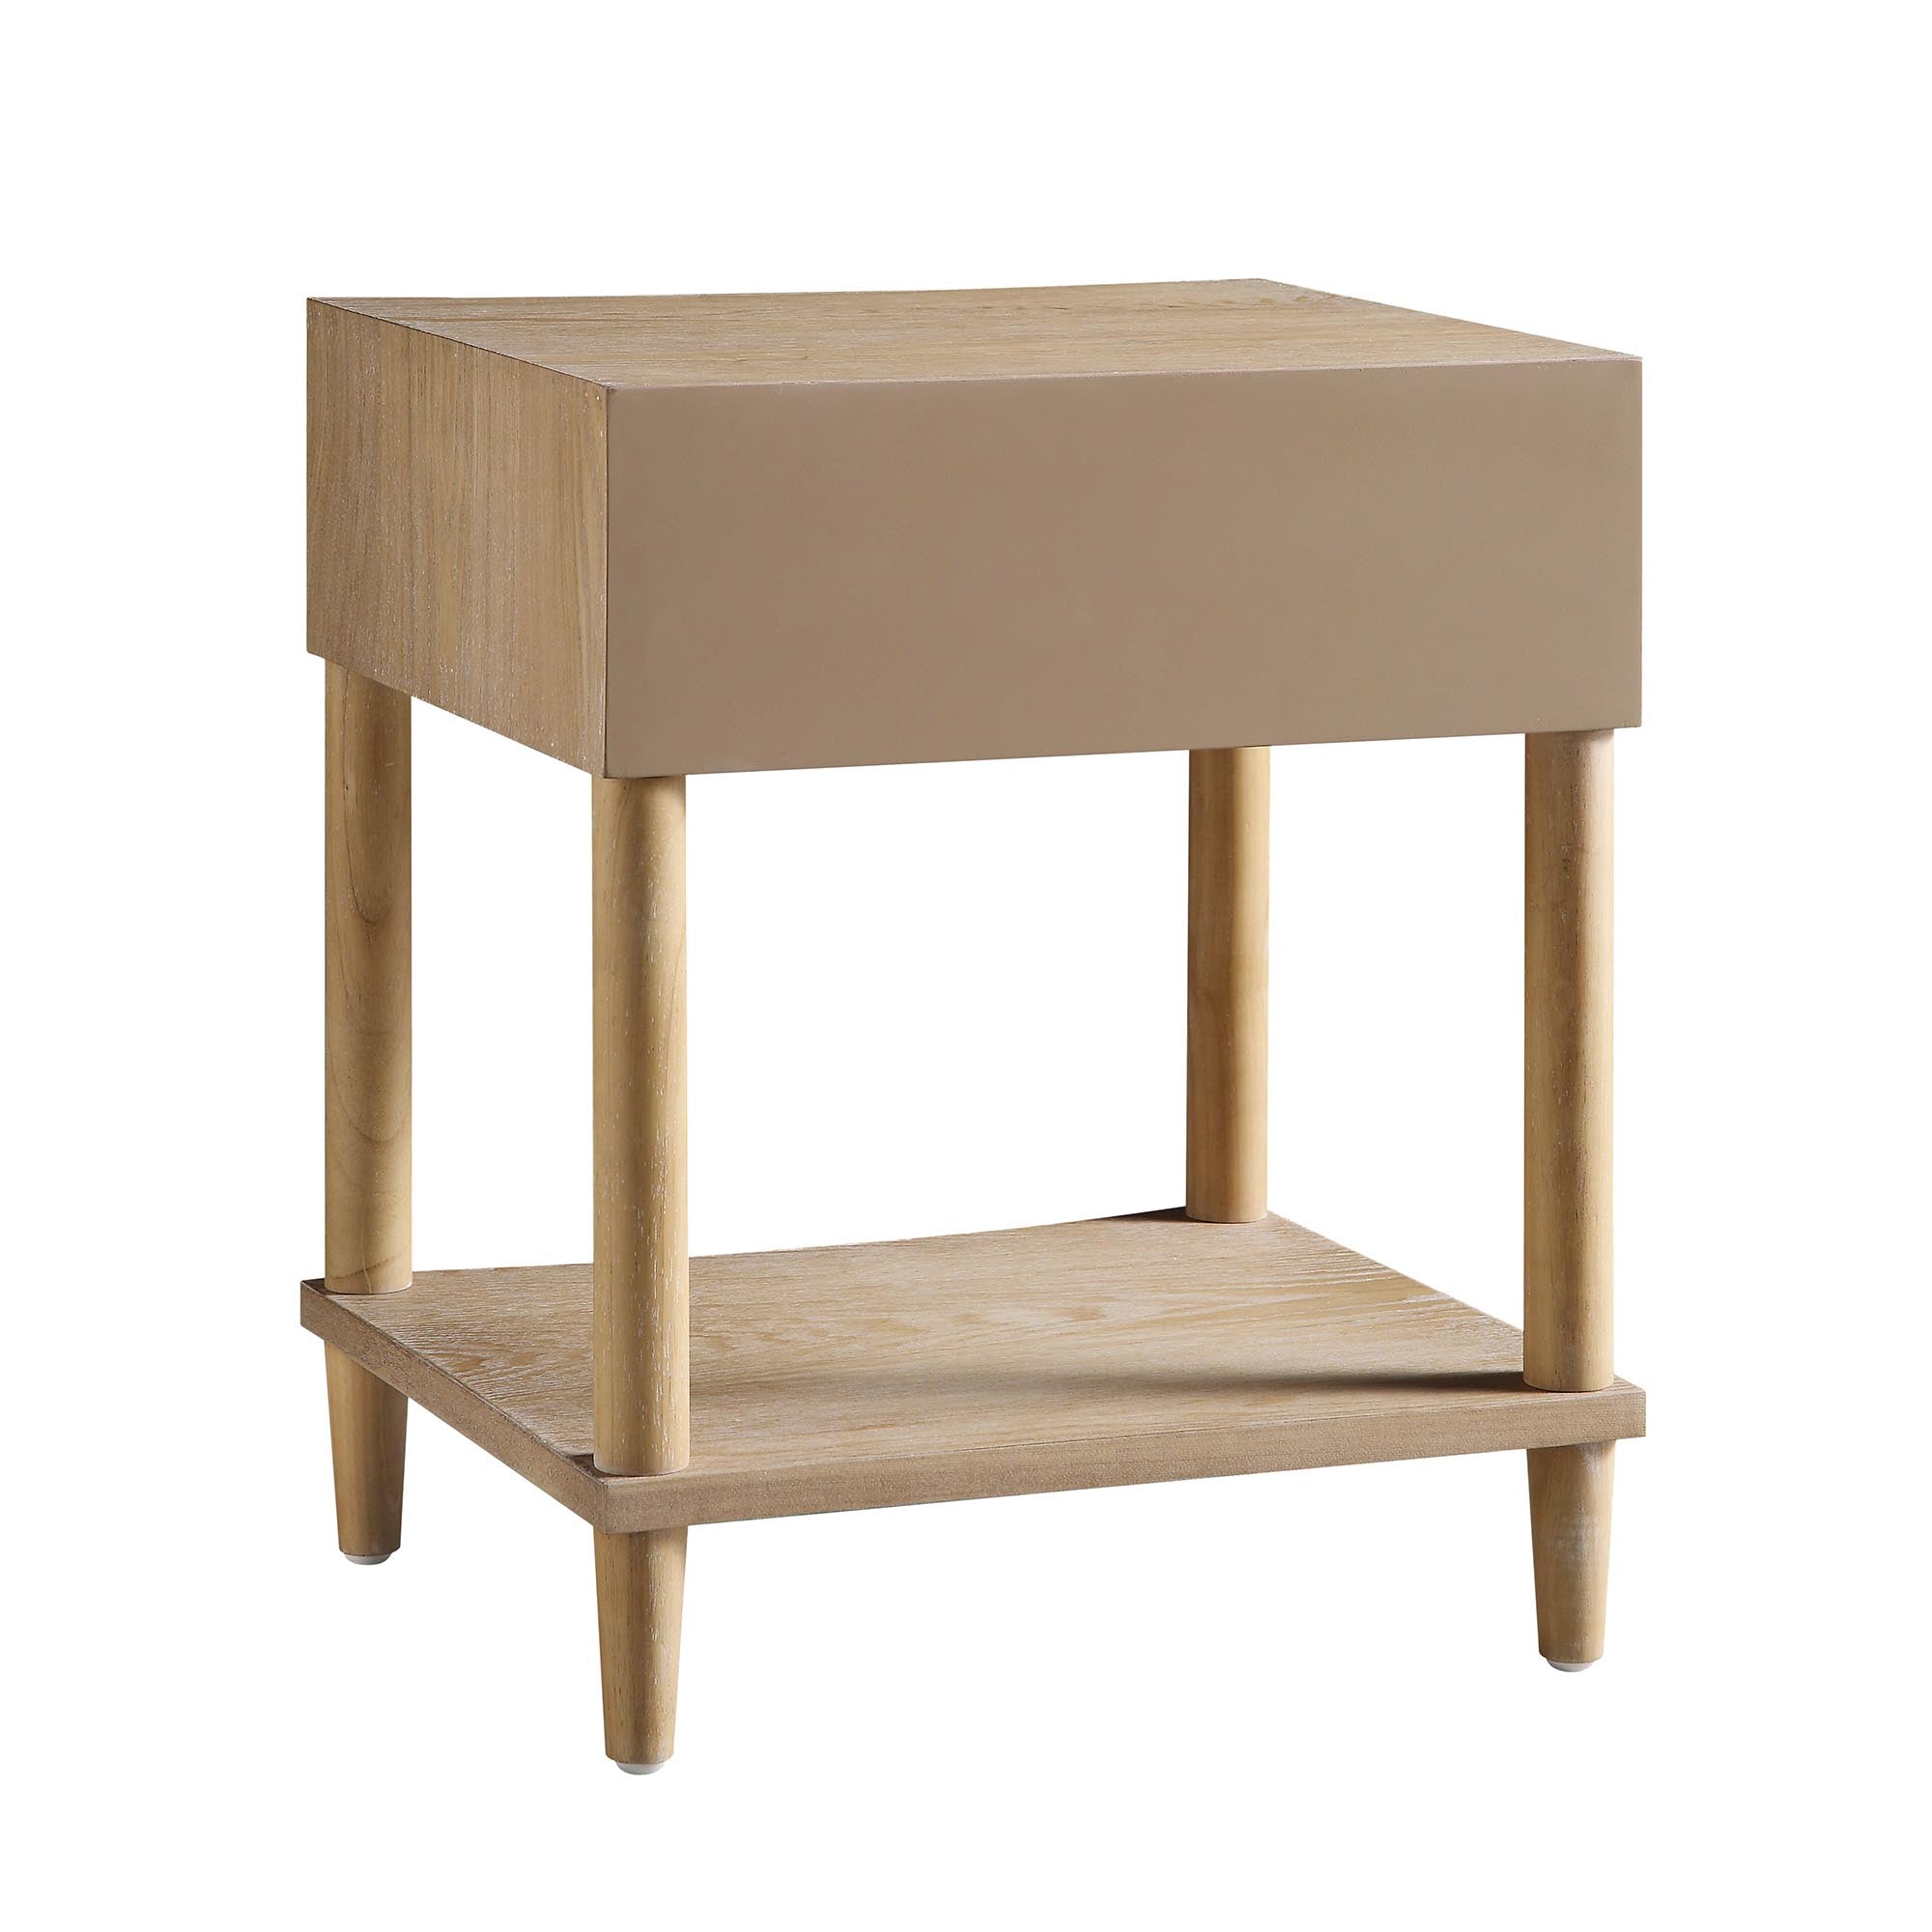 Thalia Concave 1 Drawer Bedside Table, Natural